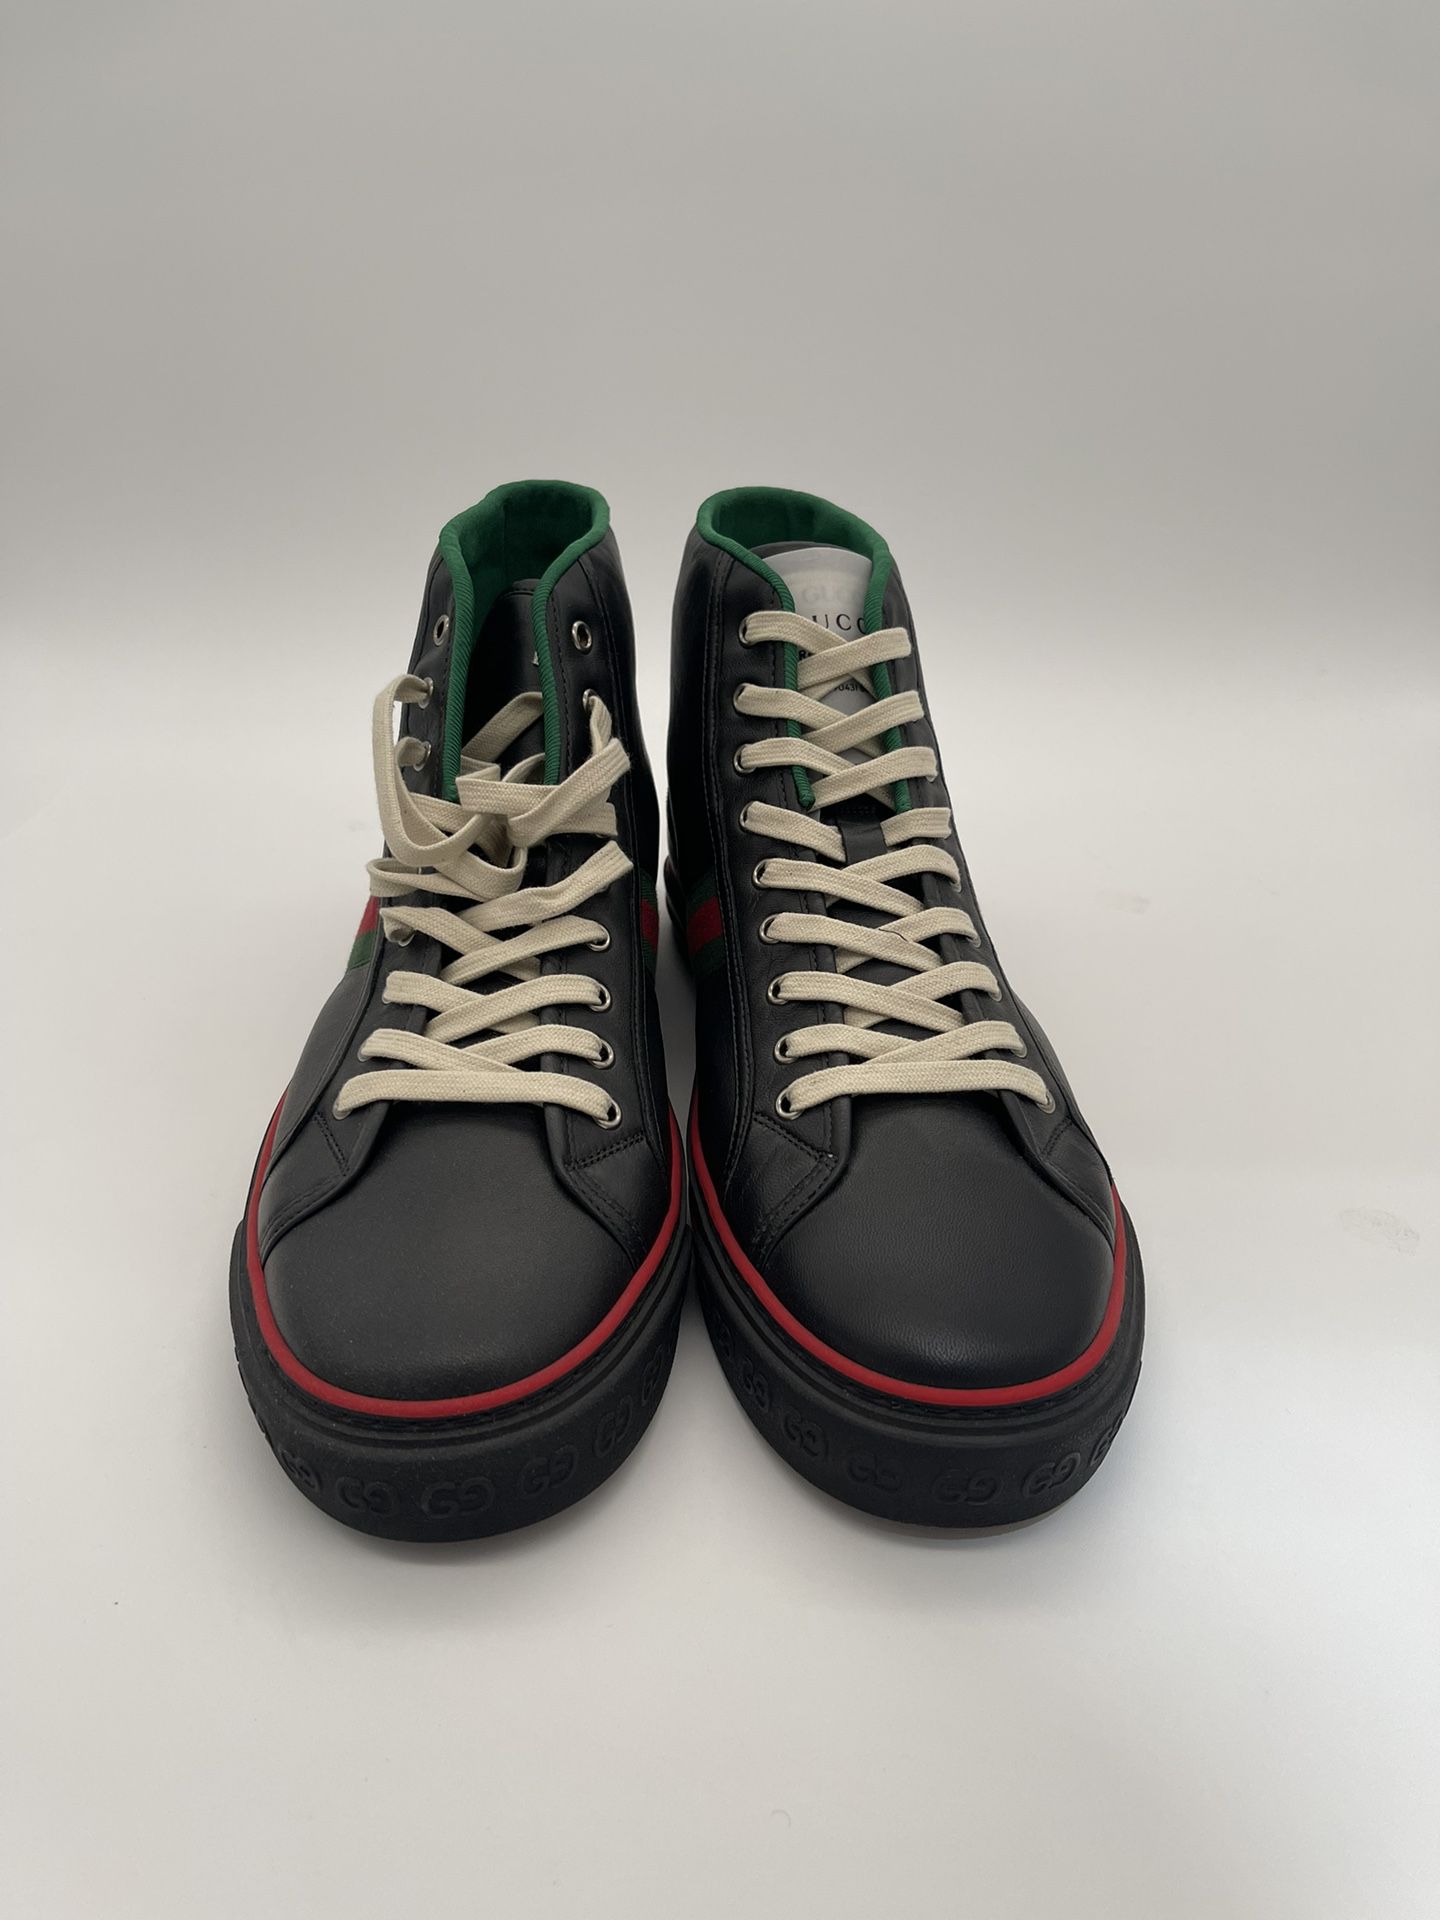 Gucci Black Leather High tops Sneakers